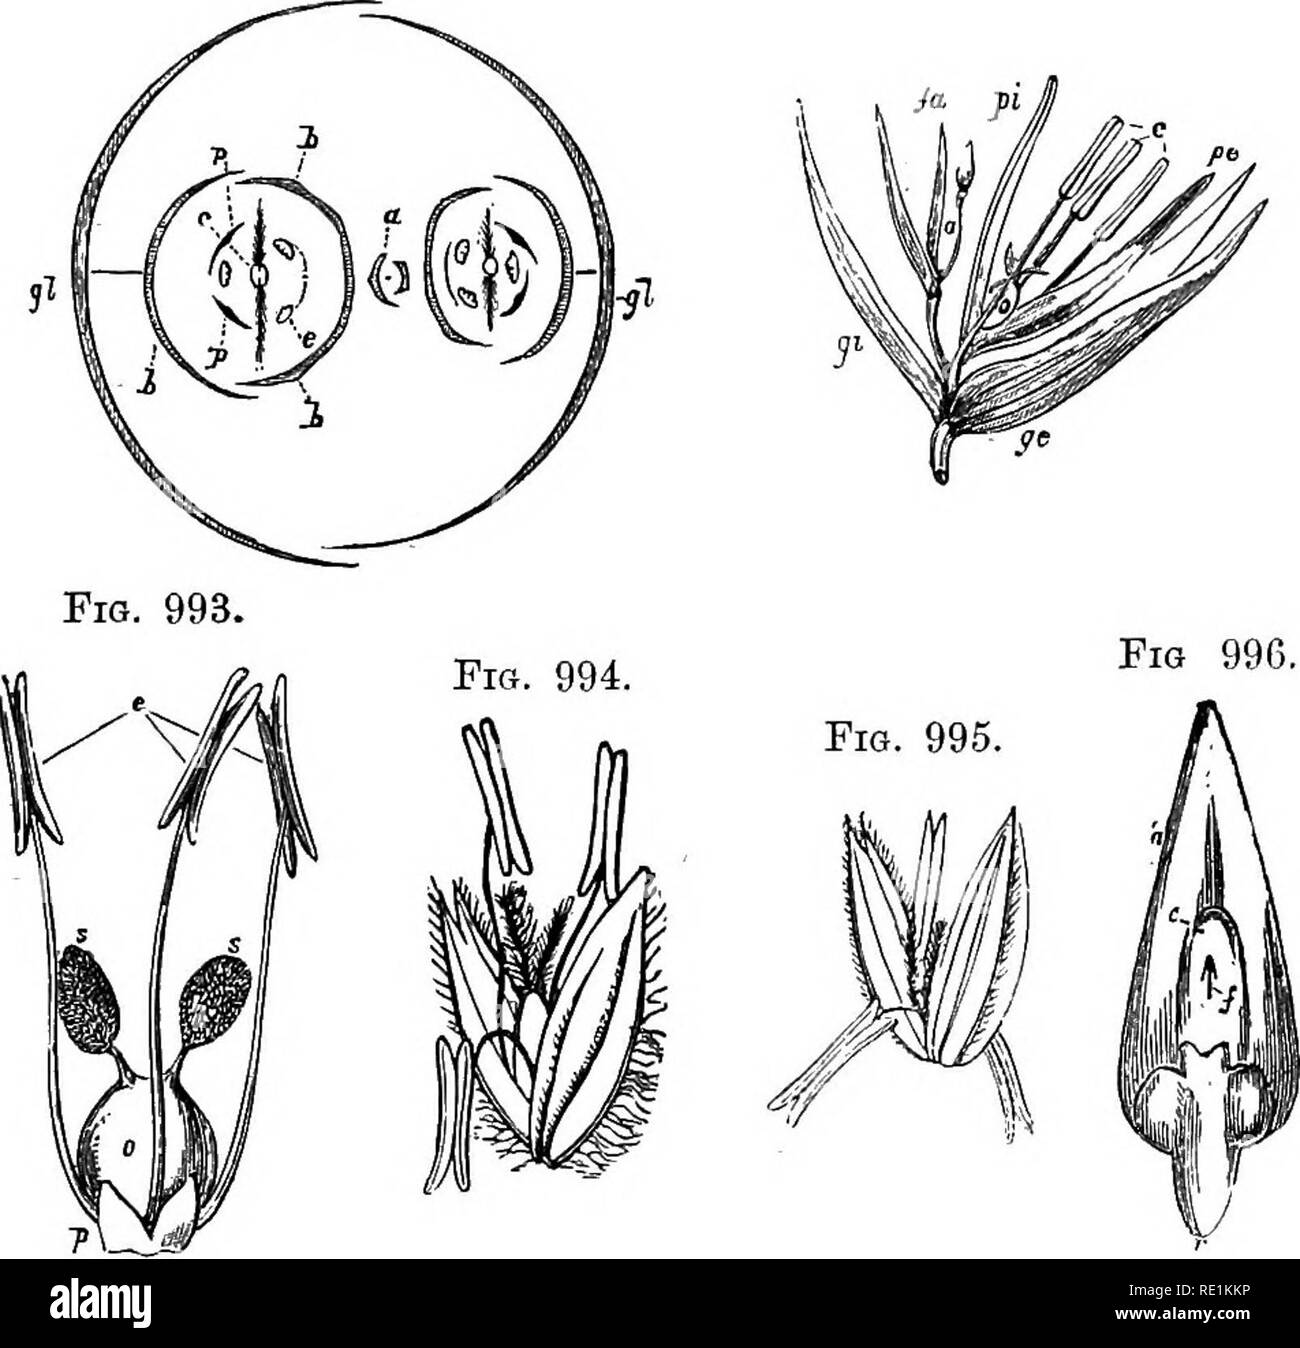 . A manual of botany. Botany. MONOCOTTLEDONES 217 hypogy^oiis scales (lodiculcd, squamulce,' or glumellules) ; these scales- also are occasionally absent. Stamens 1—6, usually 3 fila/ments capillary; anthers 2-celled, versatile. Ovary superior 1-celled, with a solitary ascending ovule; stigmas feathery or Fig. 991. Fig. 992.. Fig. 991. Diagram of a spikelet of the Oat (Avena). (From Le Maout.) gl, gl. Two glumes, enclosing two liermaphrodite flowers, anrl one, a, abortive. b. The outer palea or flowering- glume, fc, b. The inner palea. p, p. Two scales (sguamnlce or glumellules); the dotted cu Stock Photo